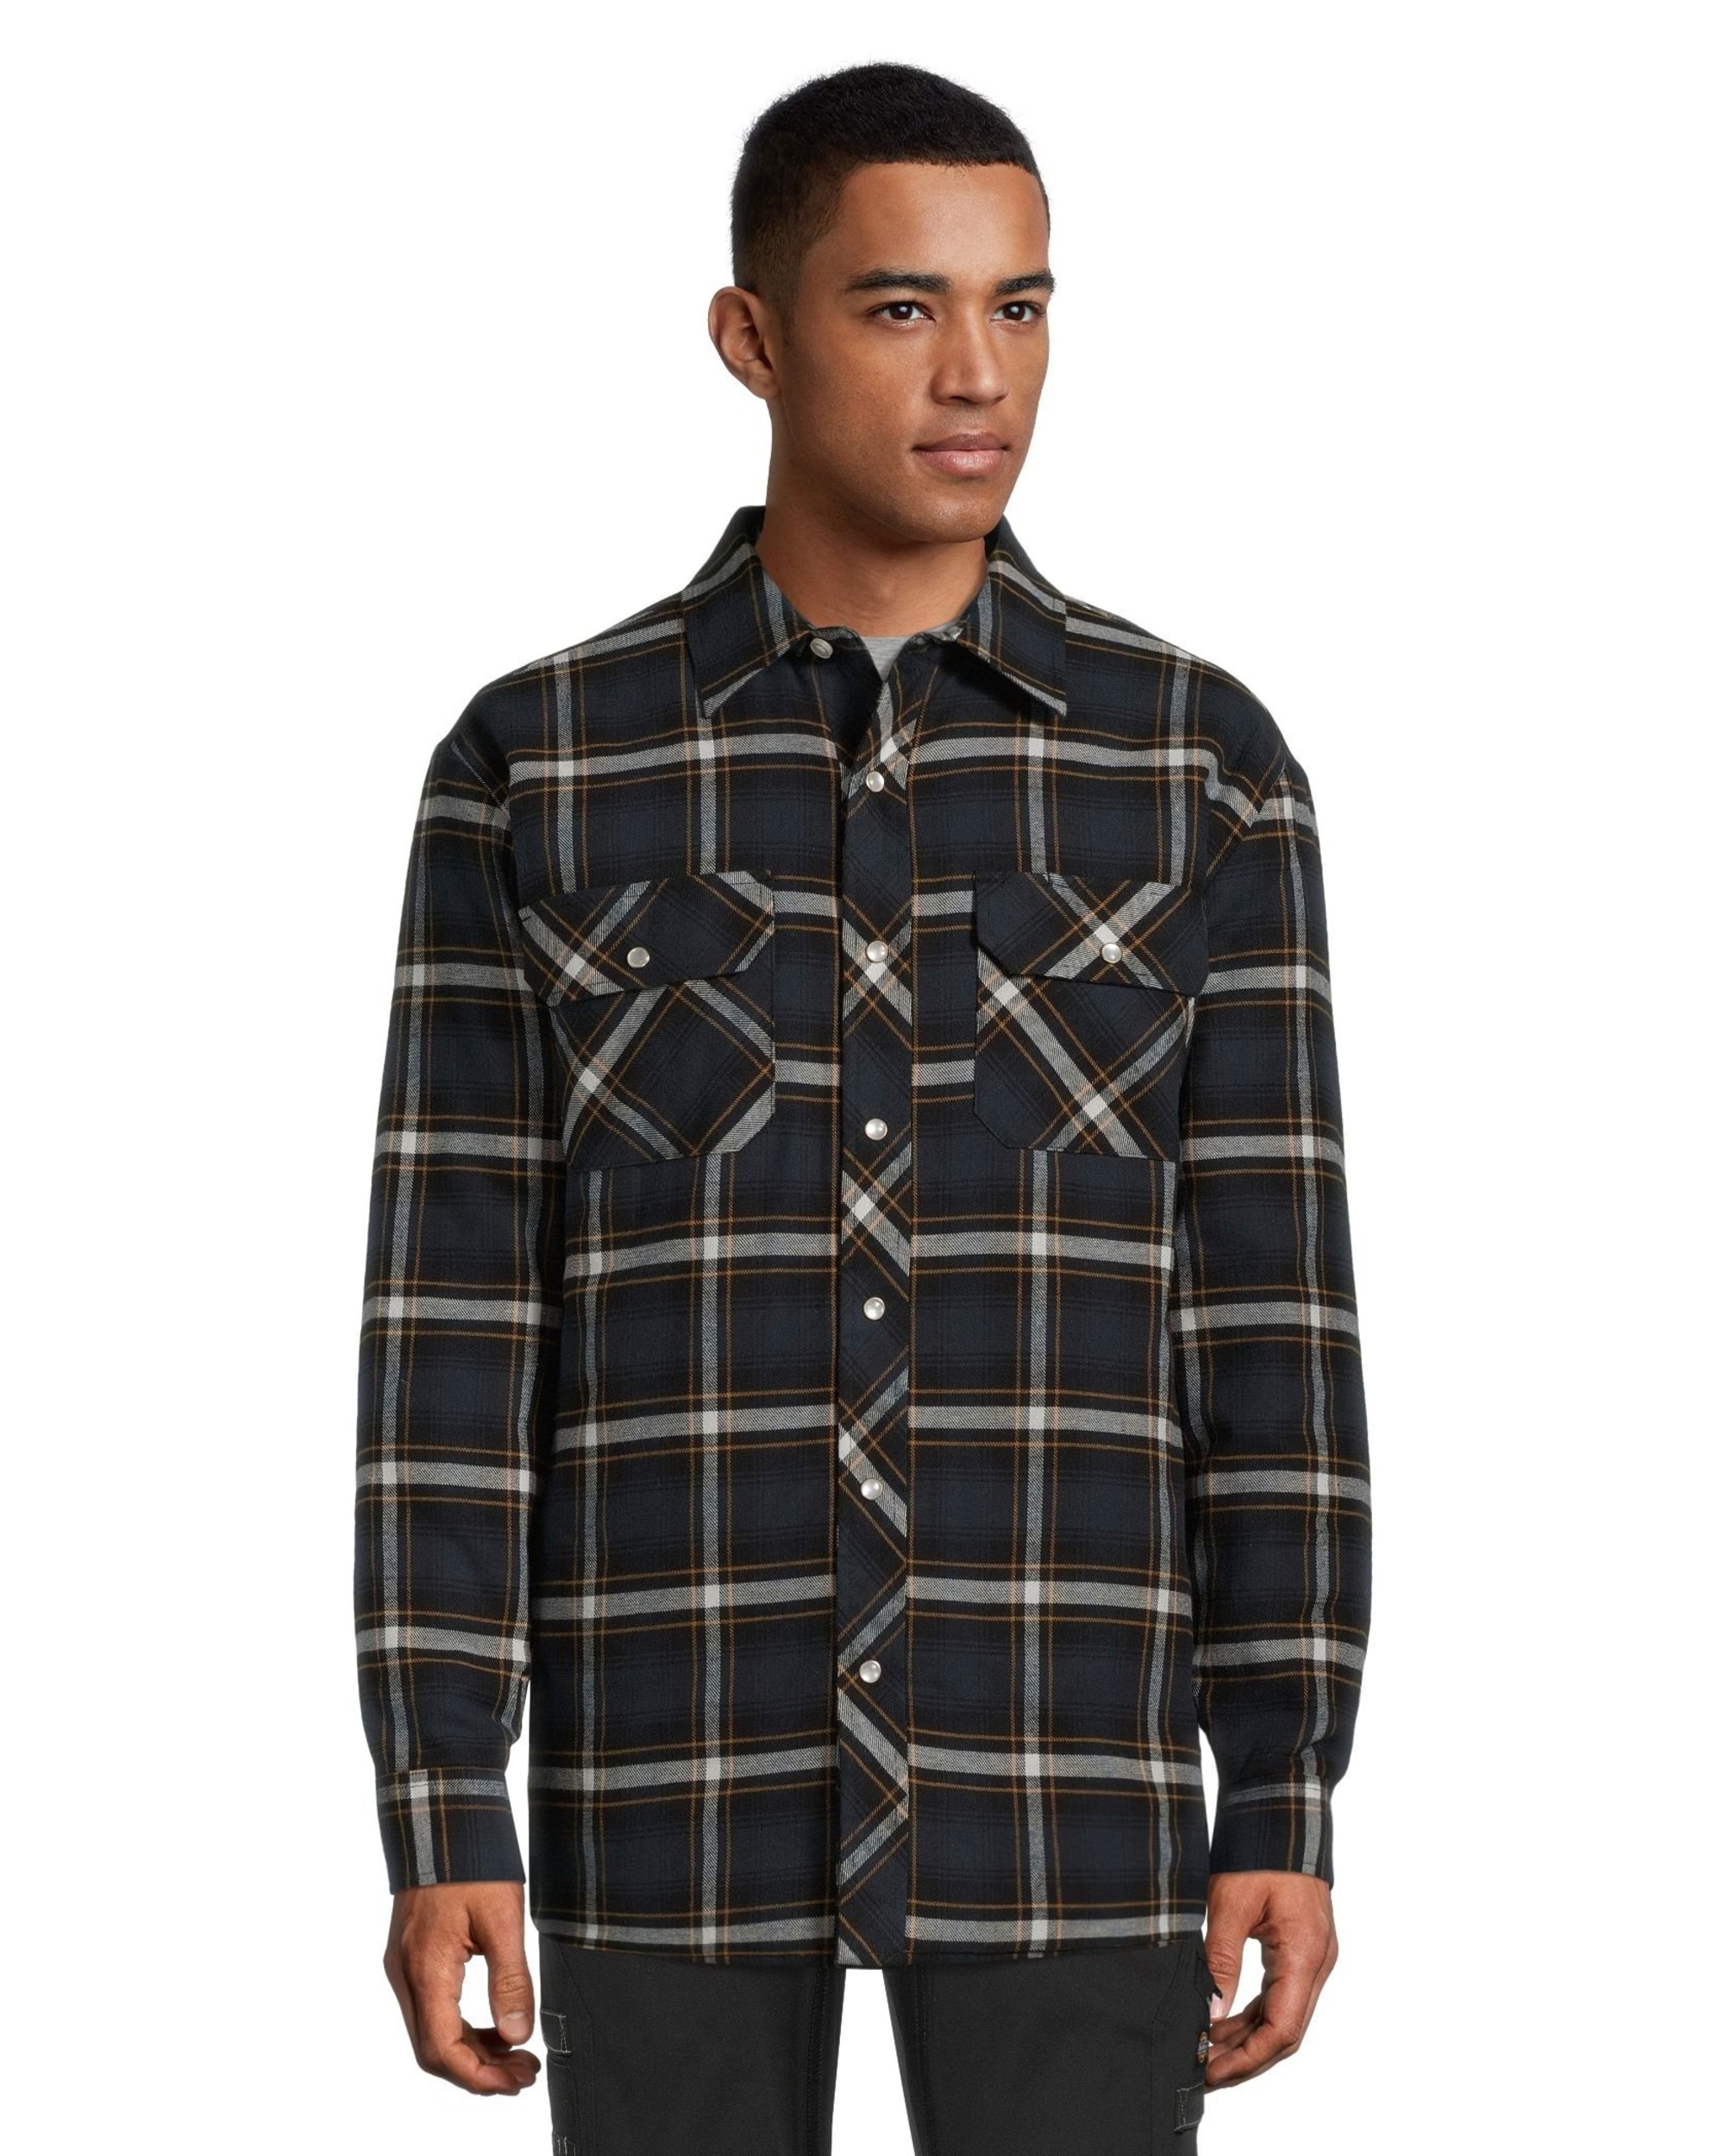 Aggressor Men's Snap-Front Insulated Quilted Flannel Work Shirt | Marks